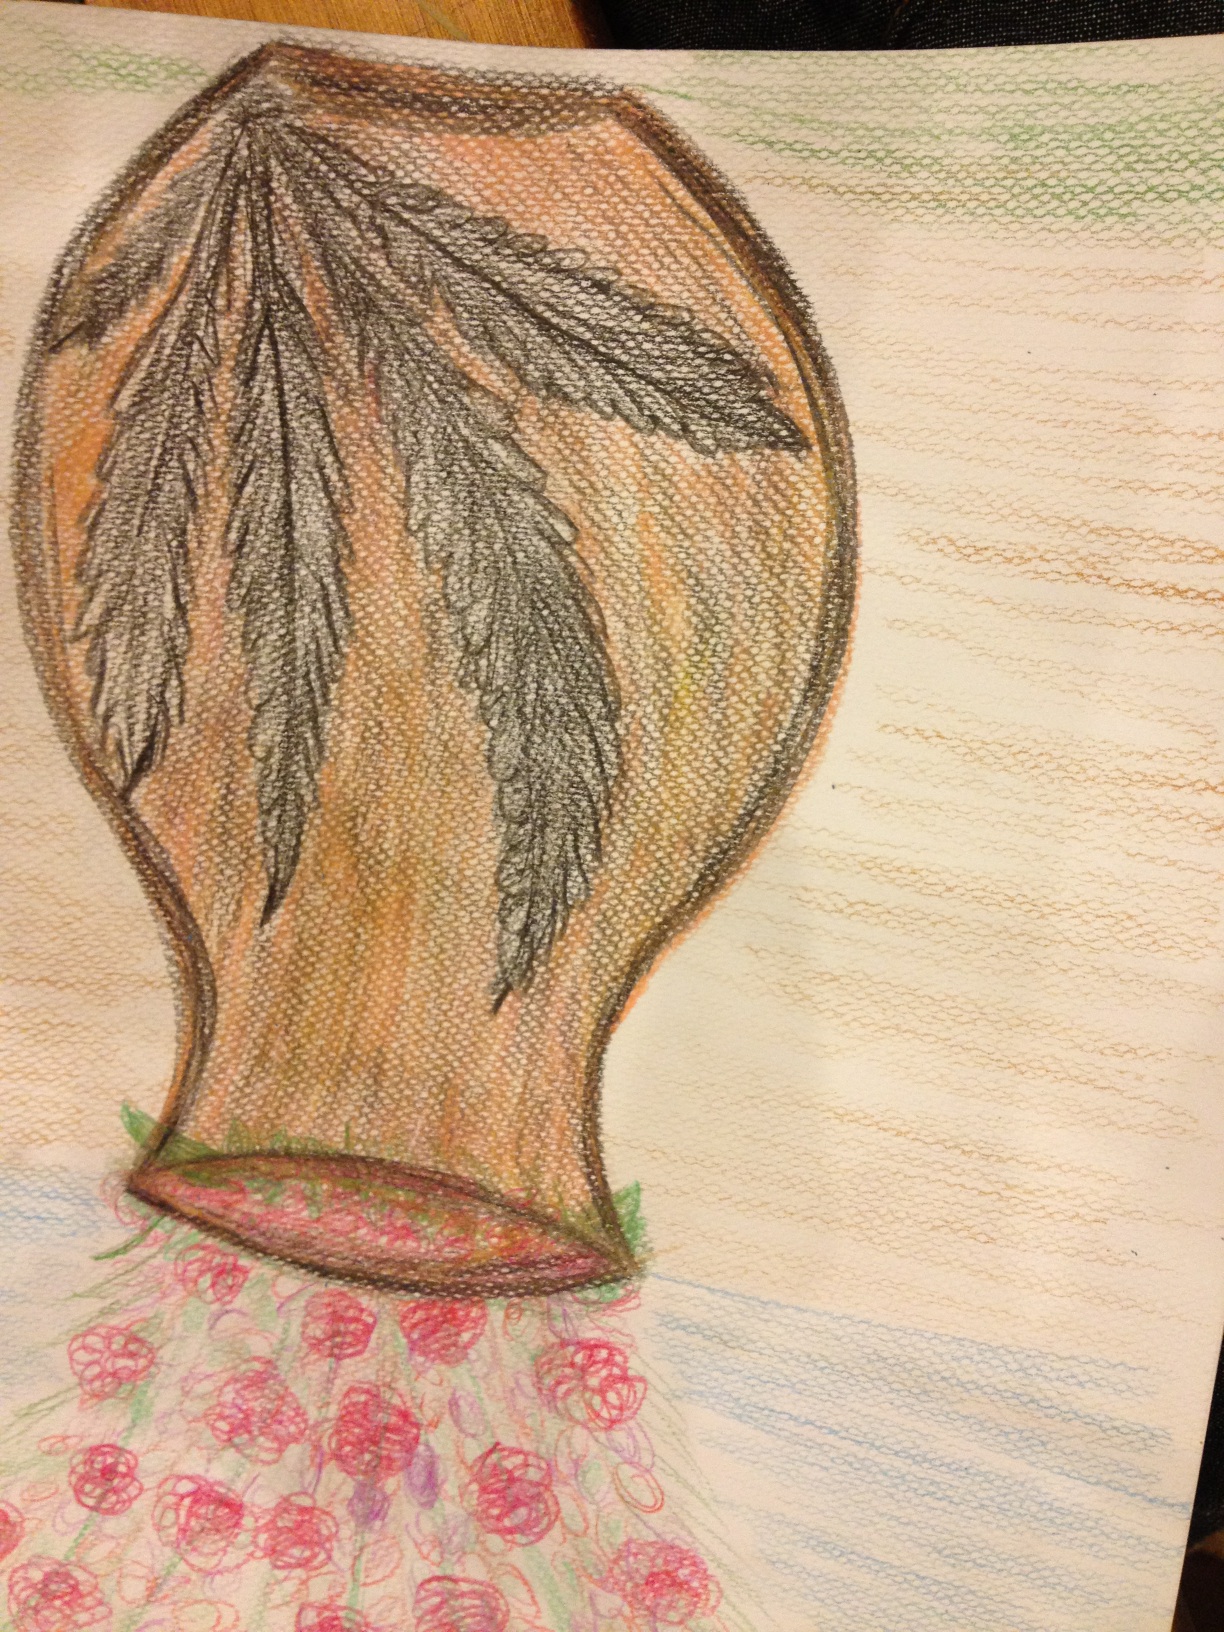 A crayon colored drawing of a vase with flowers.